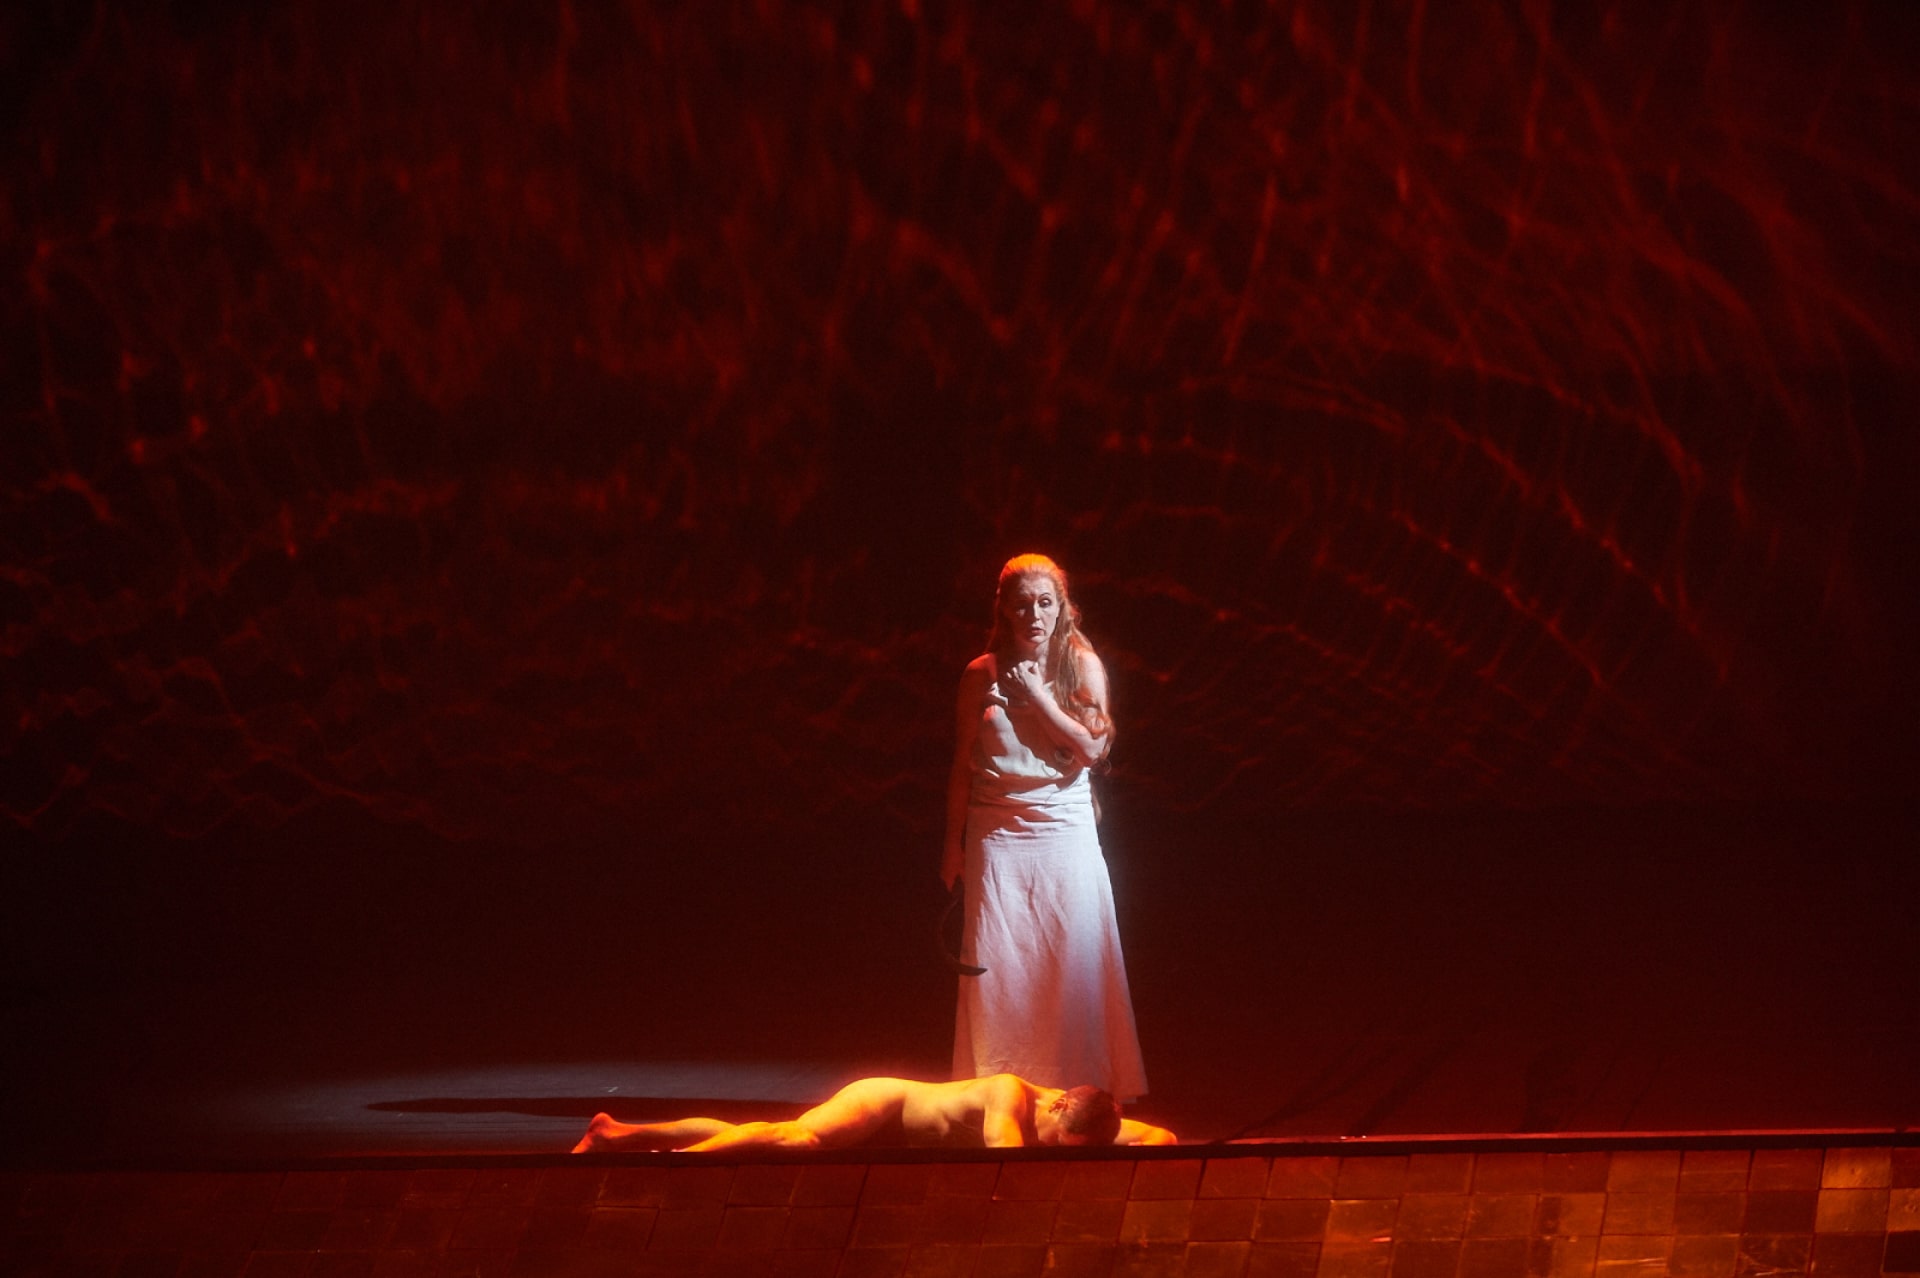 Woman in white clutches sickle over body of naked man, lit by shimmering red light overhead.